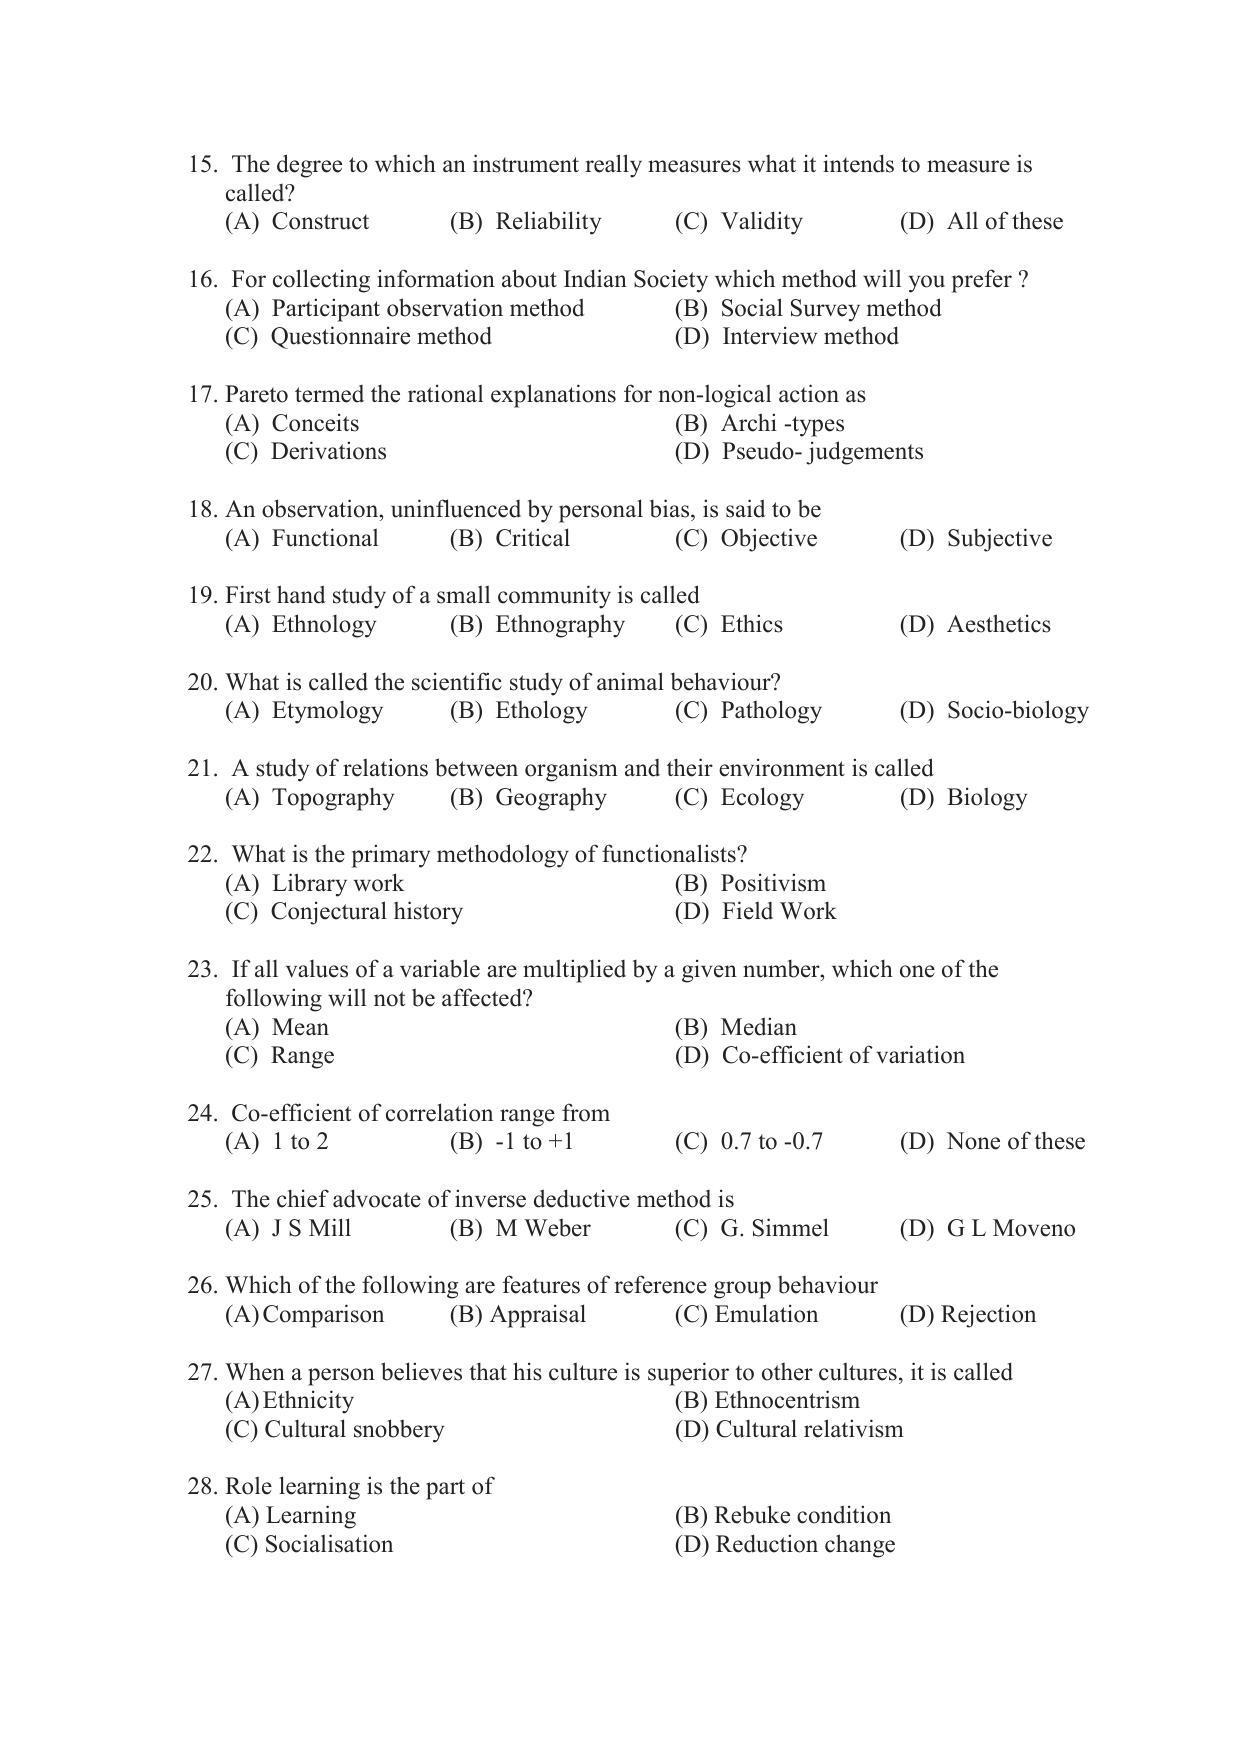 PU MPET Ancient Indian History & Archeology 2022 Question Papers - Page 59